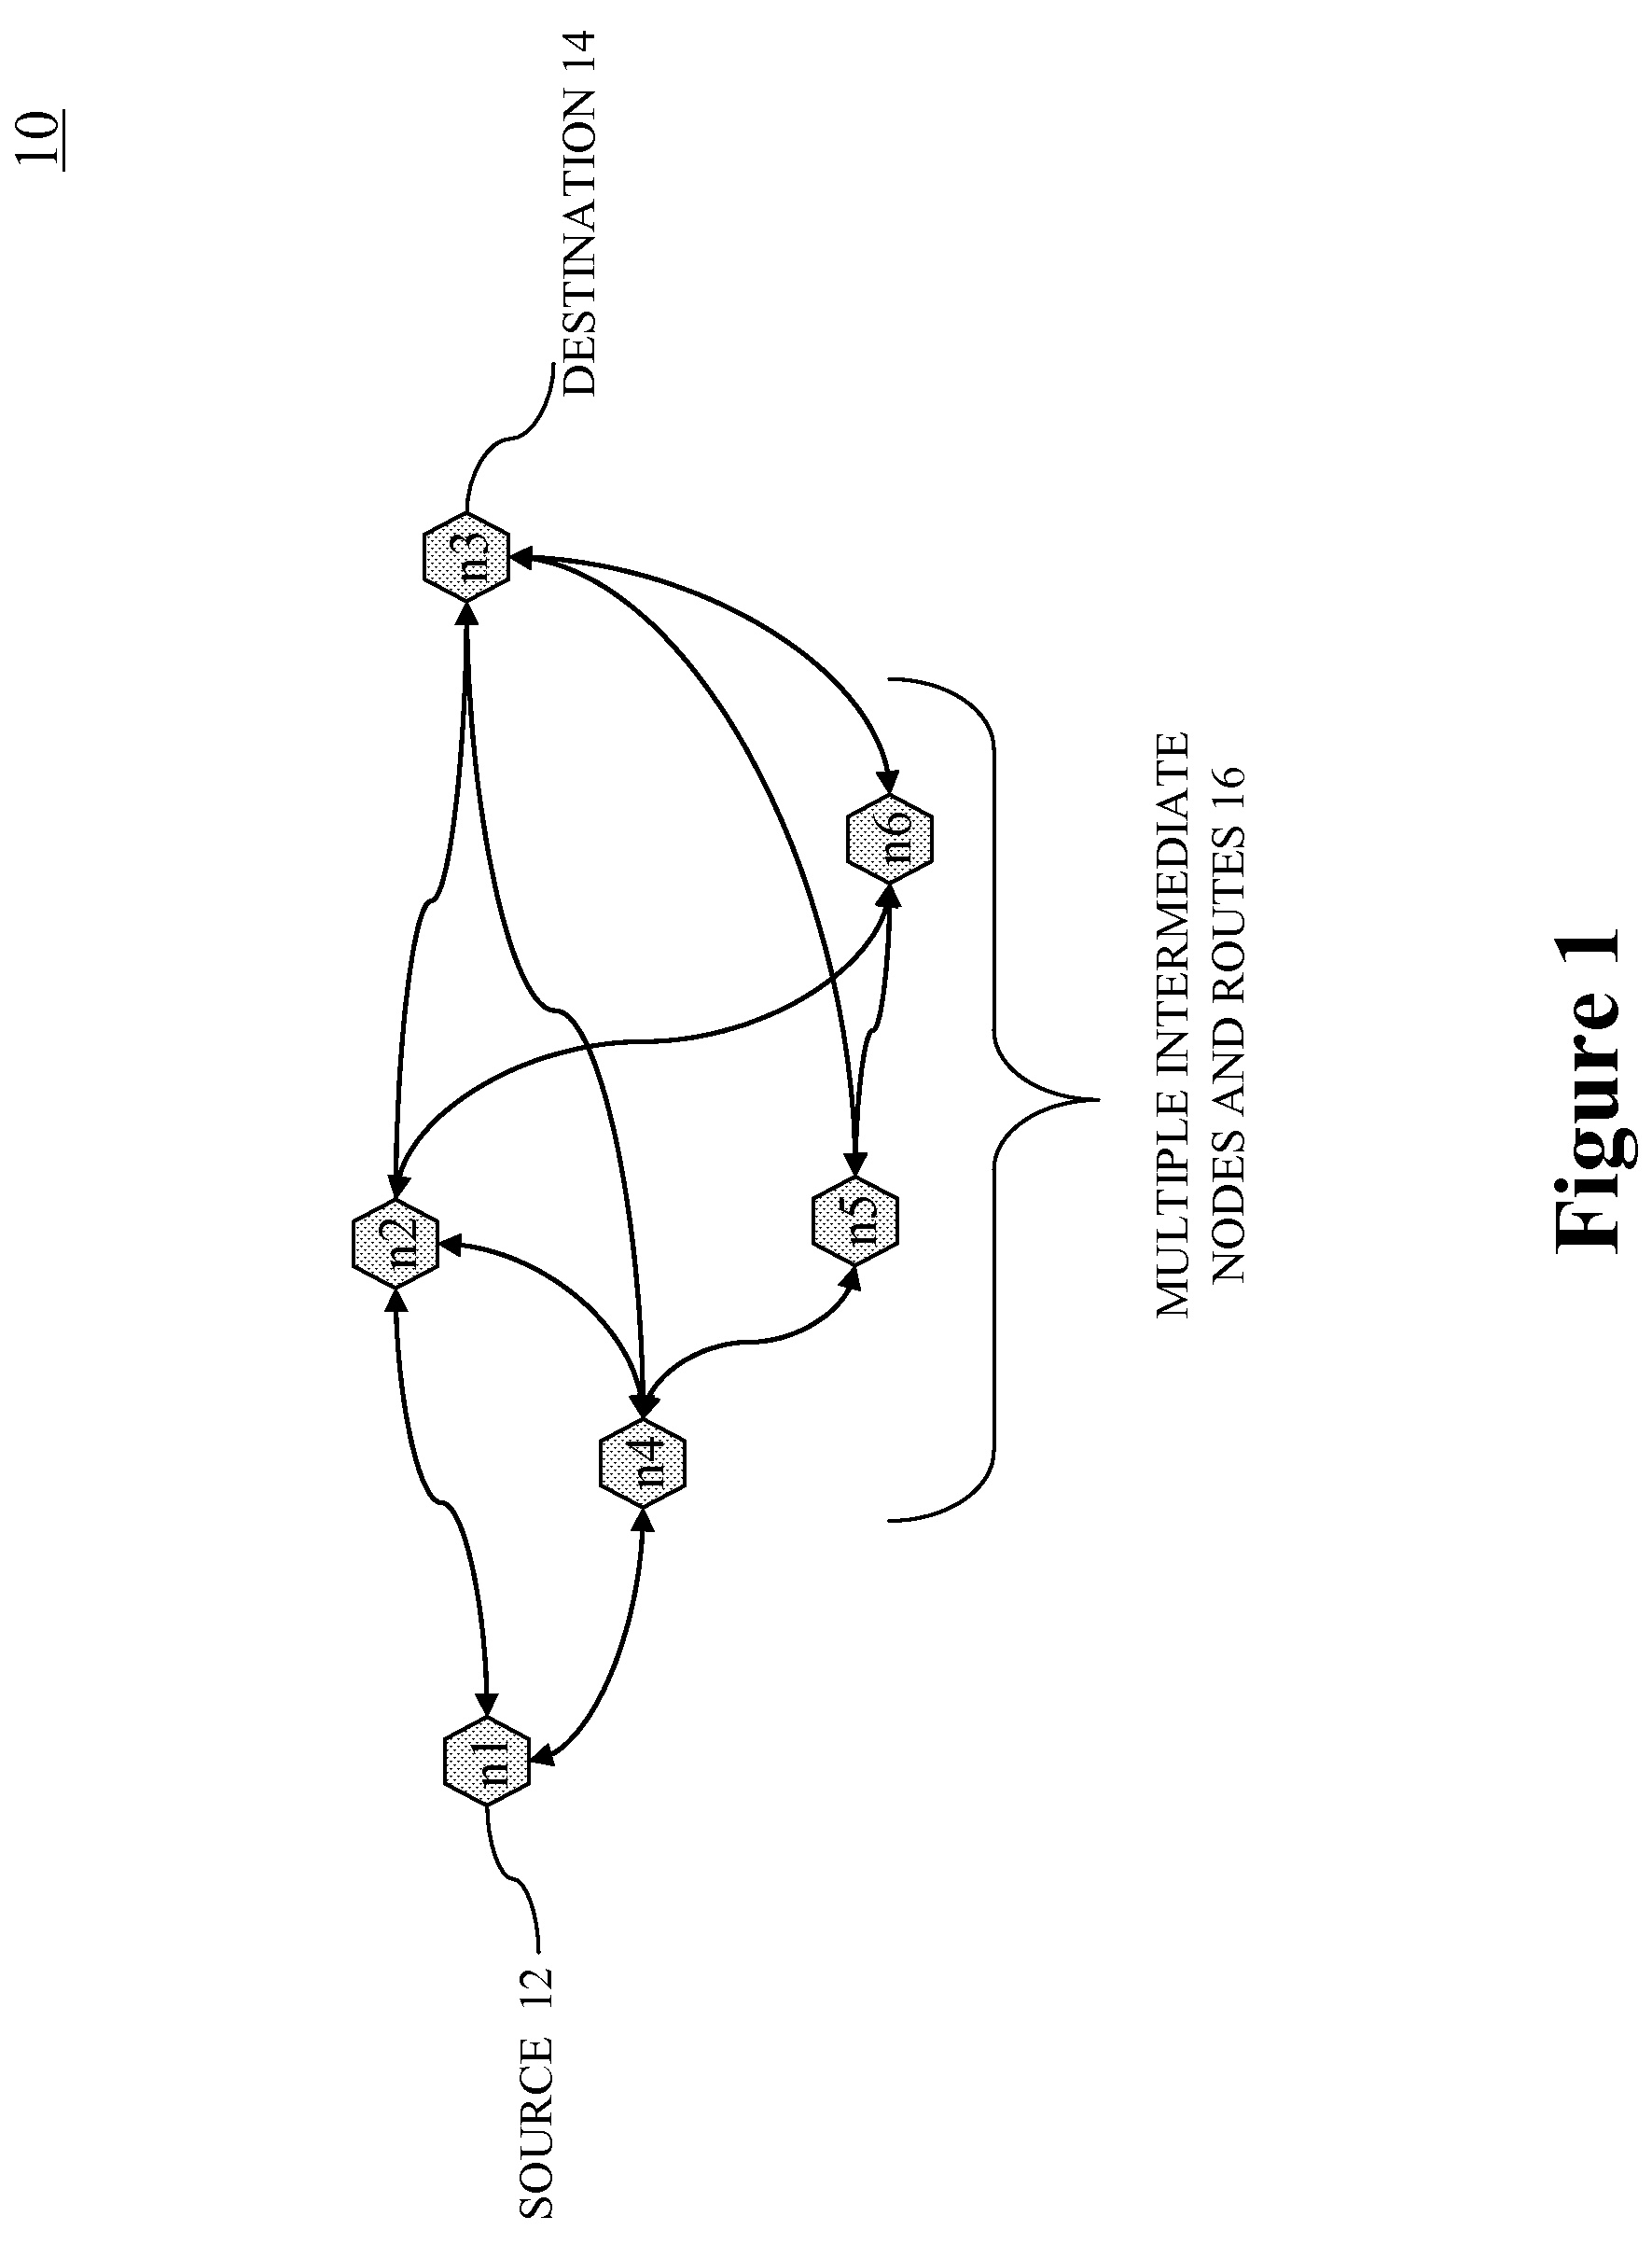 Communication Network with Skew Path Monitoring and Adjustment